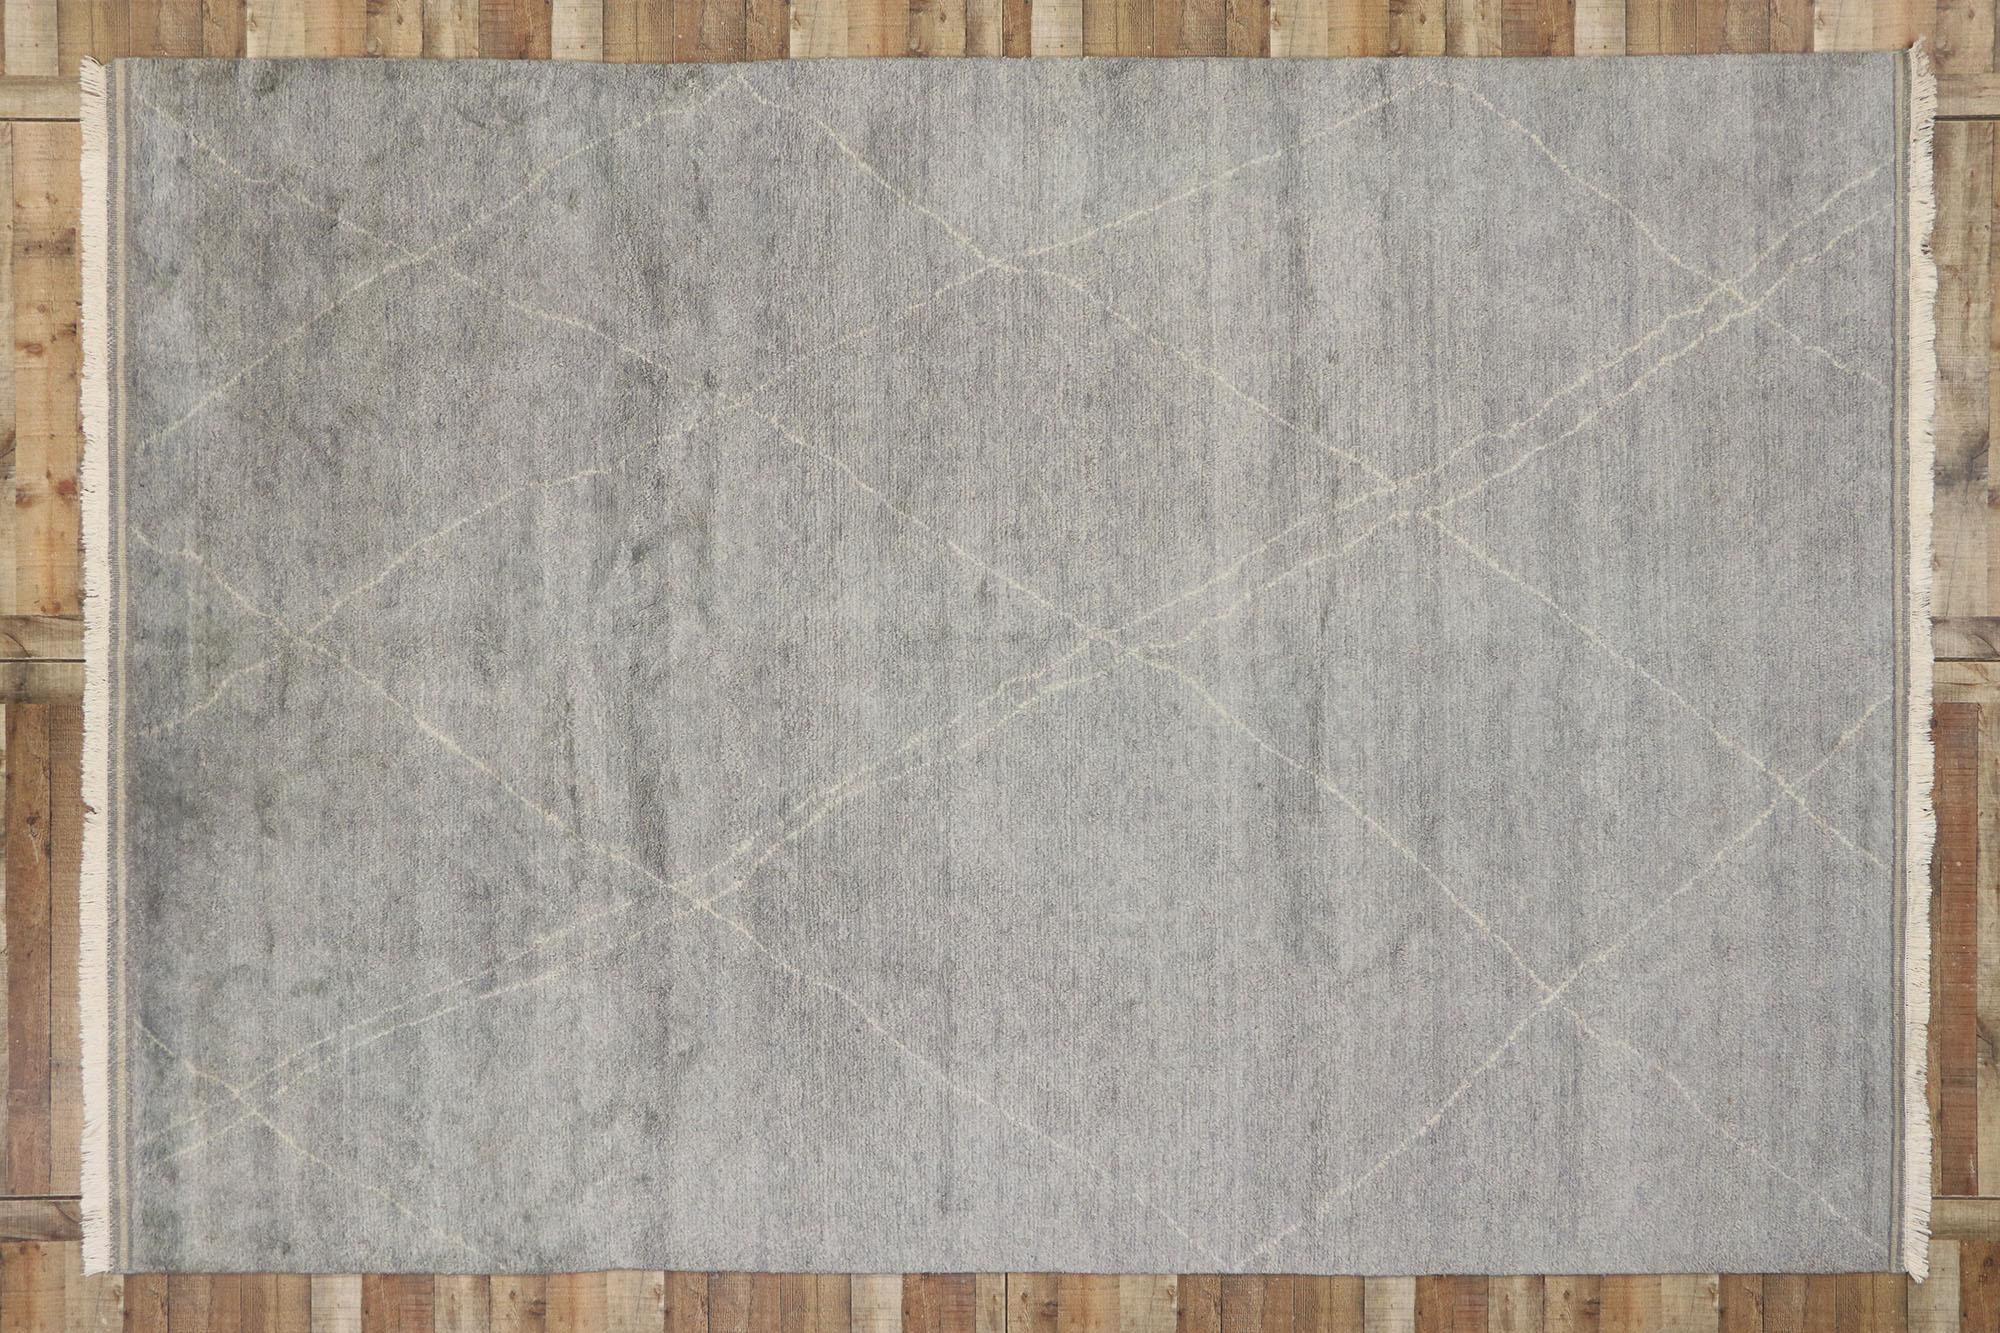 30535, new contemporary Moroccan style rug with Danish design. Luminous gray hues and rich waves of abrash create an endless fascinating effect in this hand knotted wool contemporary Moroccan style area rug. Delicate beige lines crisscross in an